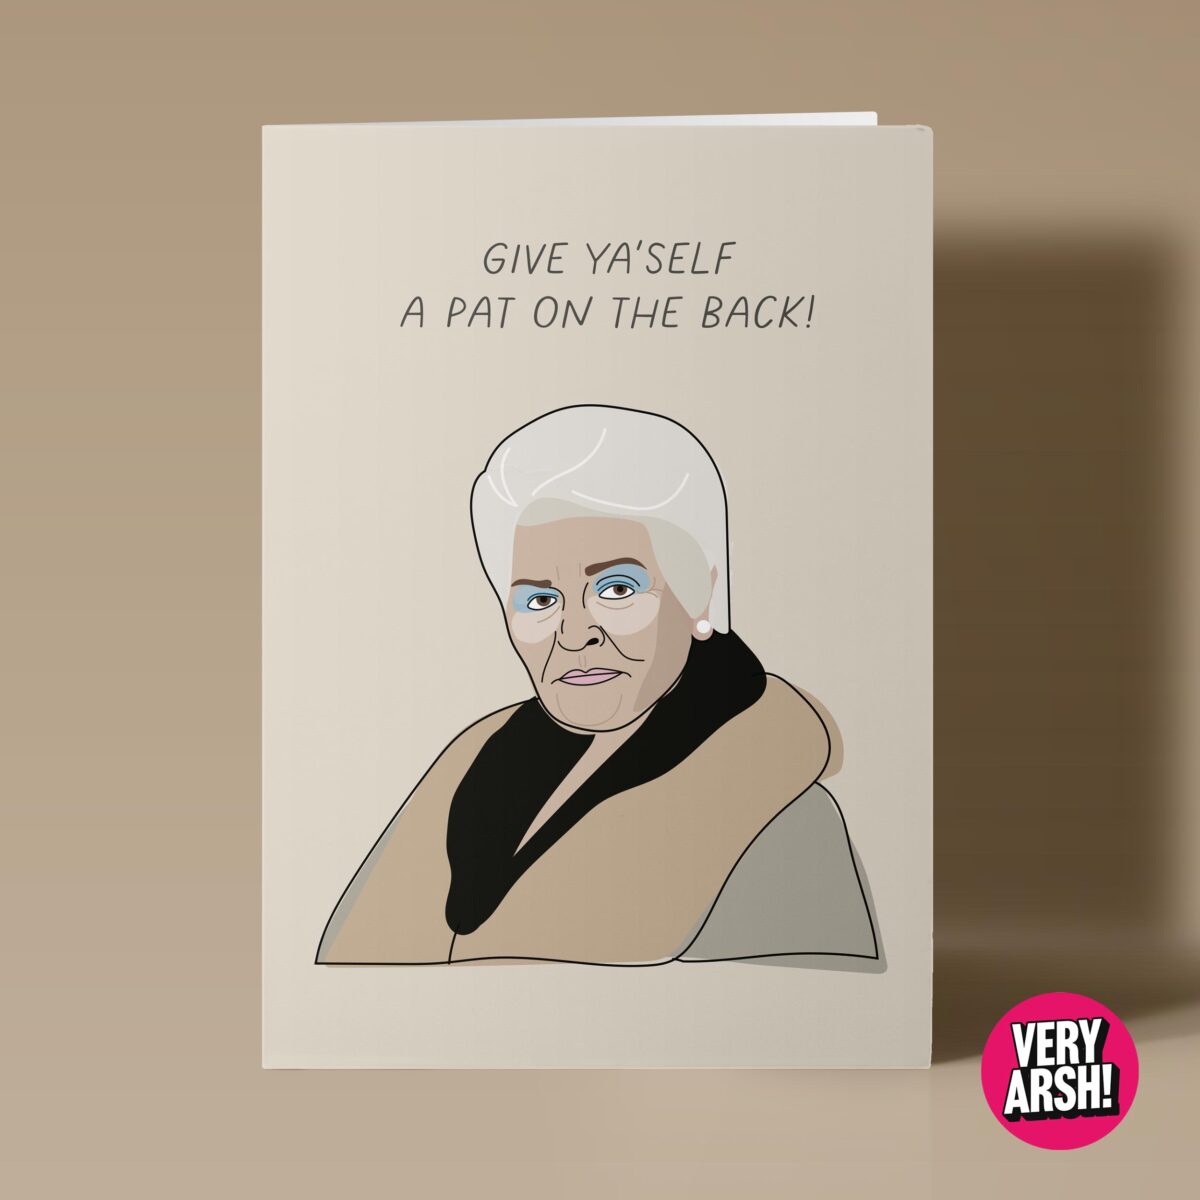 Give Yourself A Pat On The Back - Pat Butcher from Eastenders inspired Birthday Card, Valentine's Card, Christmas Card